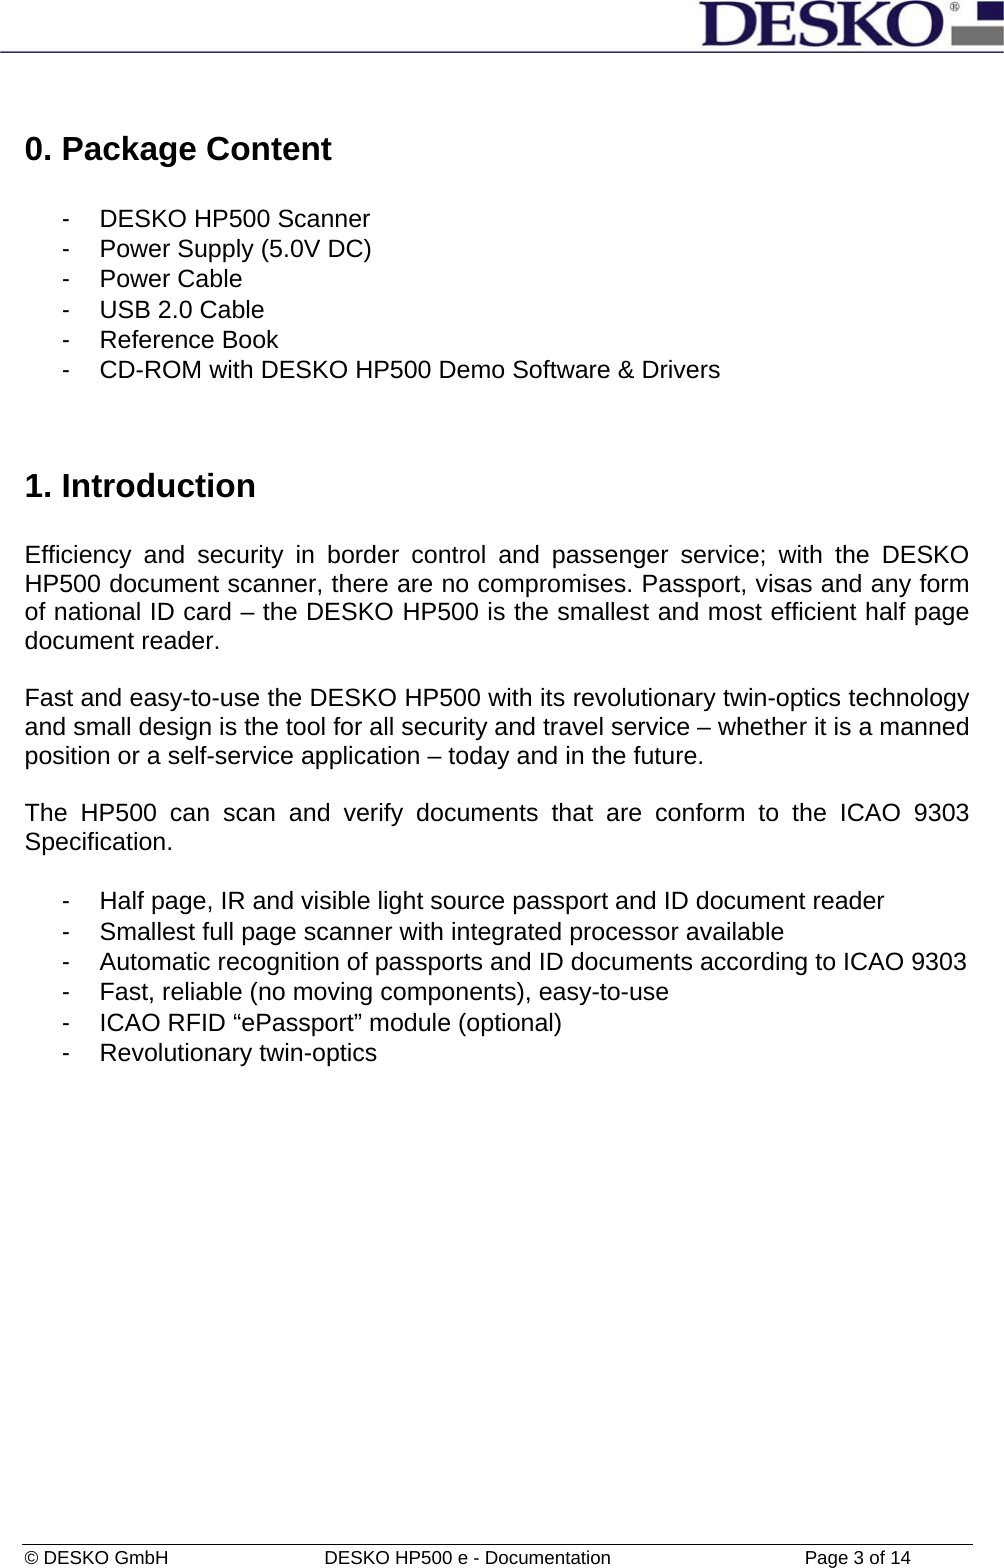  © DESKO GmbH   DESKO HP500 e - Documentation                  Page 3 of 14  0. Package Content  -  DESKO HP500 Scanner  -  Power Supply (5.0V DC) - Power Cable -  USB 2.0 Cable - Reference Book -  CD-ROM with DESKO HP500 Demo Software &amp; Drivers   1. Introduction  Efficiency and security in border control and passenger service; with the DESKO HP500 document scanner, there are no compromises. Passport, visas and any form of national ID card – the DESKO HP500 is the smallest and most efficient half page document reader.  Fast and easy-to-use the DESKO HP500 with its revolutionary twin-optics technology and small design is the tool for all security and travel service – whether it is a manned position or a self-service application – today and in the future.  The HP500 can scan and verify documents that are conform to the ICAO 9303 Specification.  -  Half page, IR and visible light source passport and ID document reader -  Smallest full page scanner with integrated processor available -  Automatic recognition of passports and ID documents according to ICAO 9303 -  Fast, reliable (no moving components), easy-to-use -  ICAO RFID “ePassport” module (optional) - Revolutionary twin-optics  